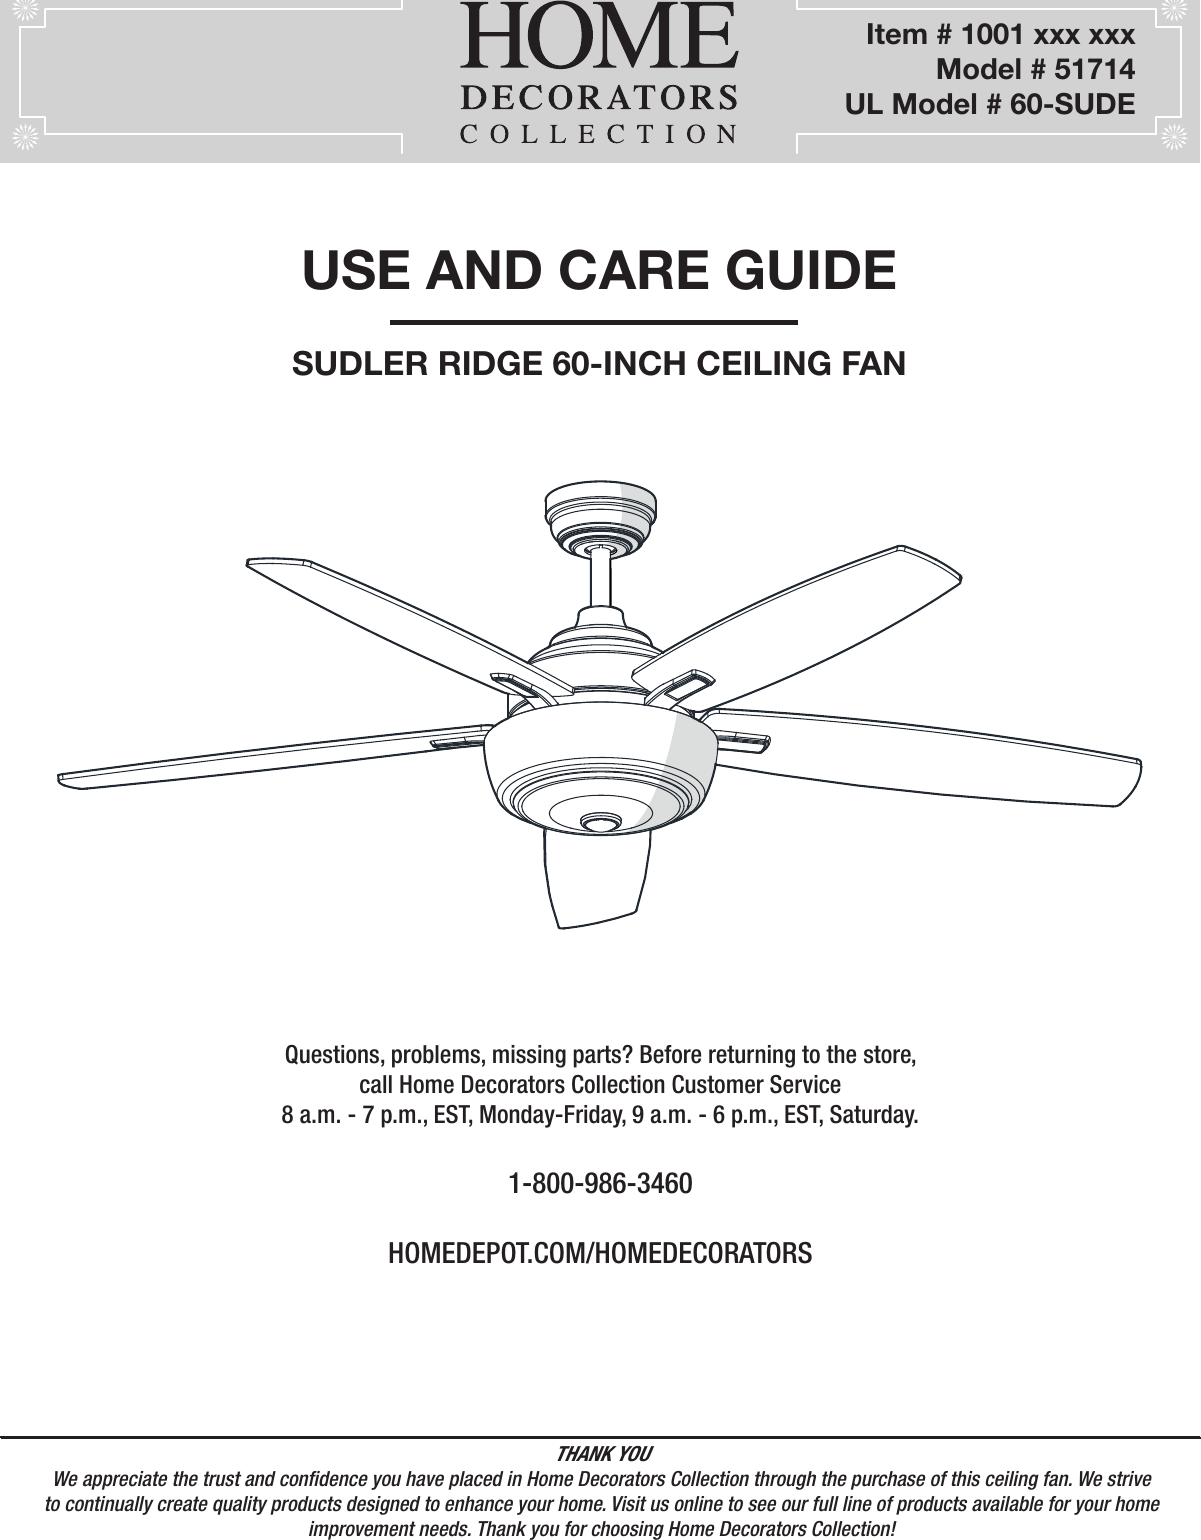  60-INCH CEILING FANUSE AND CARE GUIDEQuestions, problems, missing parts? Before returning to the store,call Home Decorators Collection Customer Service8 a.m. - 7 p.m., EST, Monday-Friday, 9 a.m. - 6 p.m., EST, Saturday.1-800-986-3460HOMEDEPOT.COM/HOMEDECORATORSTHANK YOUWe appreciate the trust and condence you have placed in Home Decorators Collection through the purchase of this ceiling fan. We strive to continually create quality products designed to enhance your home. Visit us online to see our full line of products available for your home improvement needs. Thank you for choosing Home Decorators Collection!         Item # 1001 xxx xxx       Model # 51714UL Model # 60-SUDESUDLER RIDGE